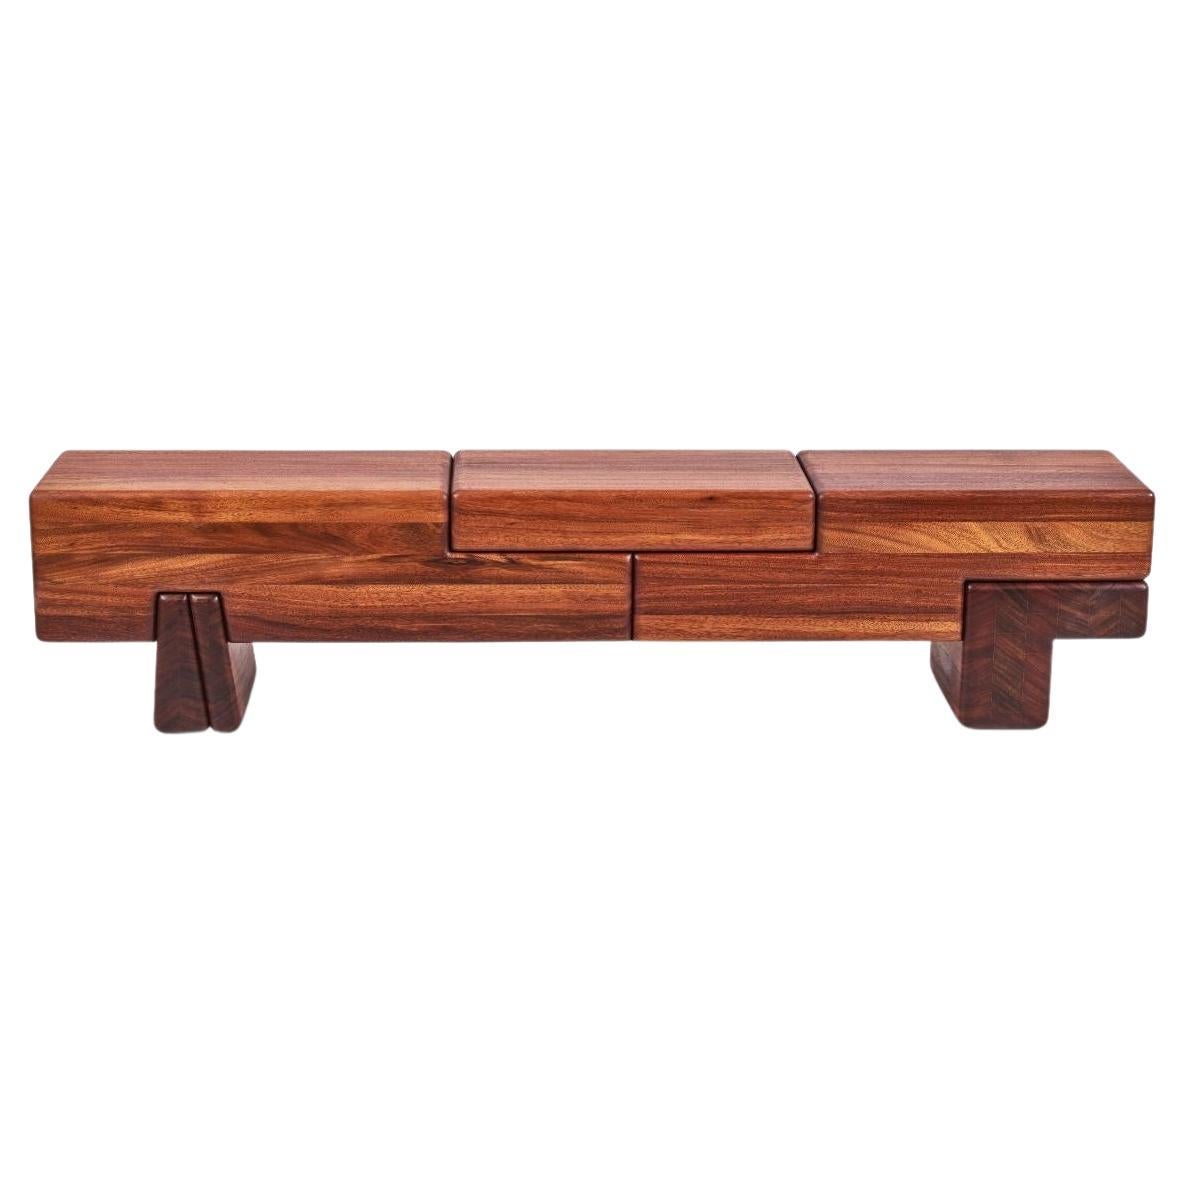 Okan D'arfique Laminated Bench by Contemporary Ecowood For Sale